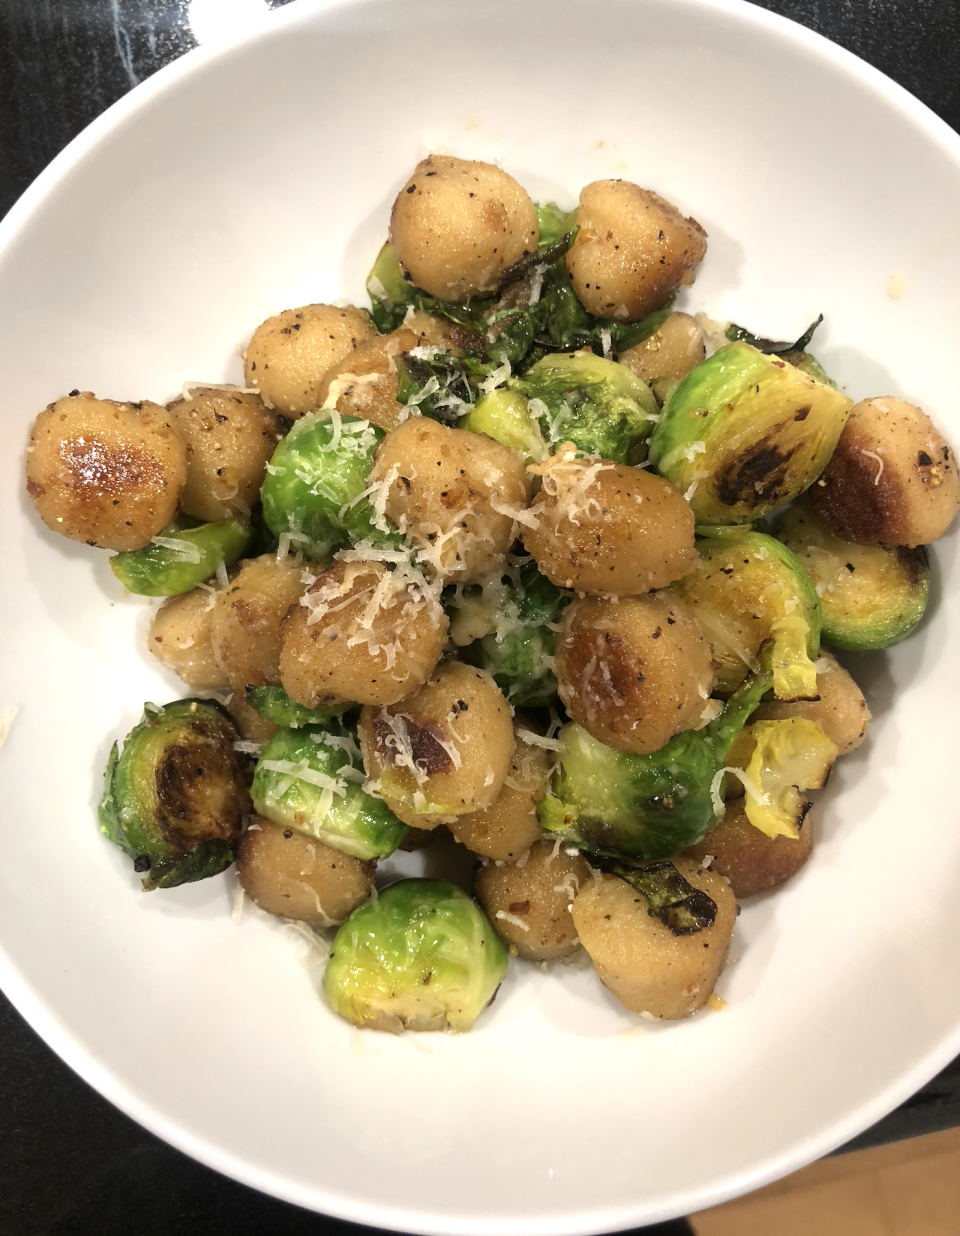 A bowl containing sautéed scallops and Brussels sprouts, topped with grated cheese